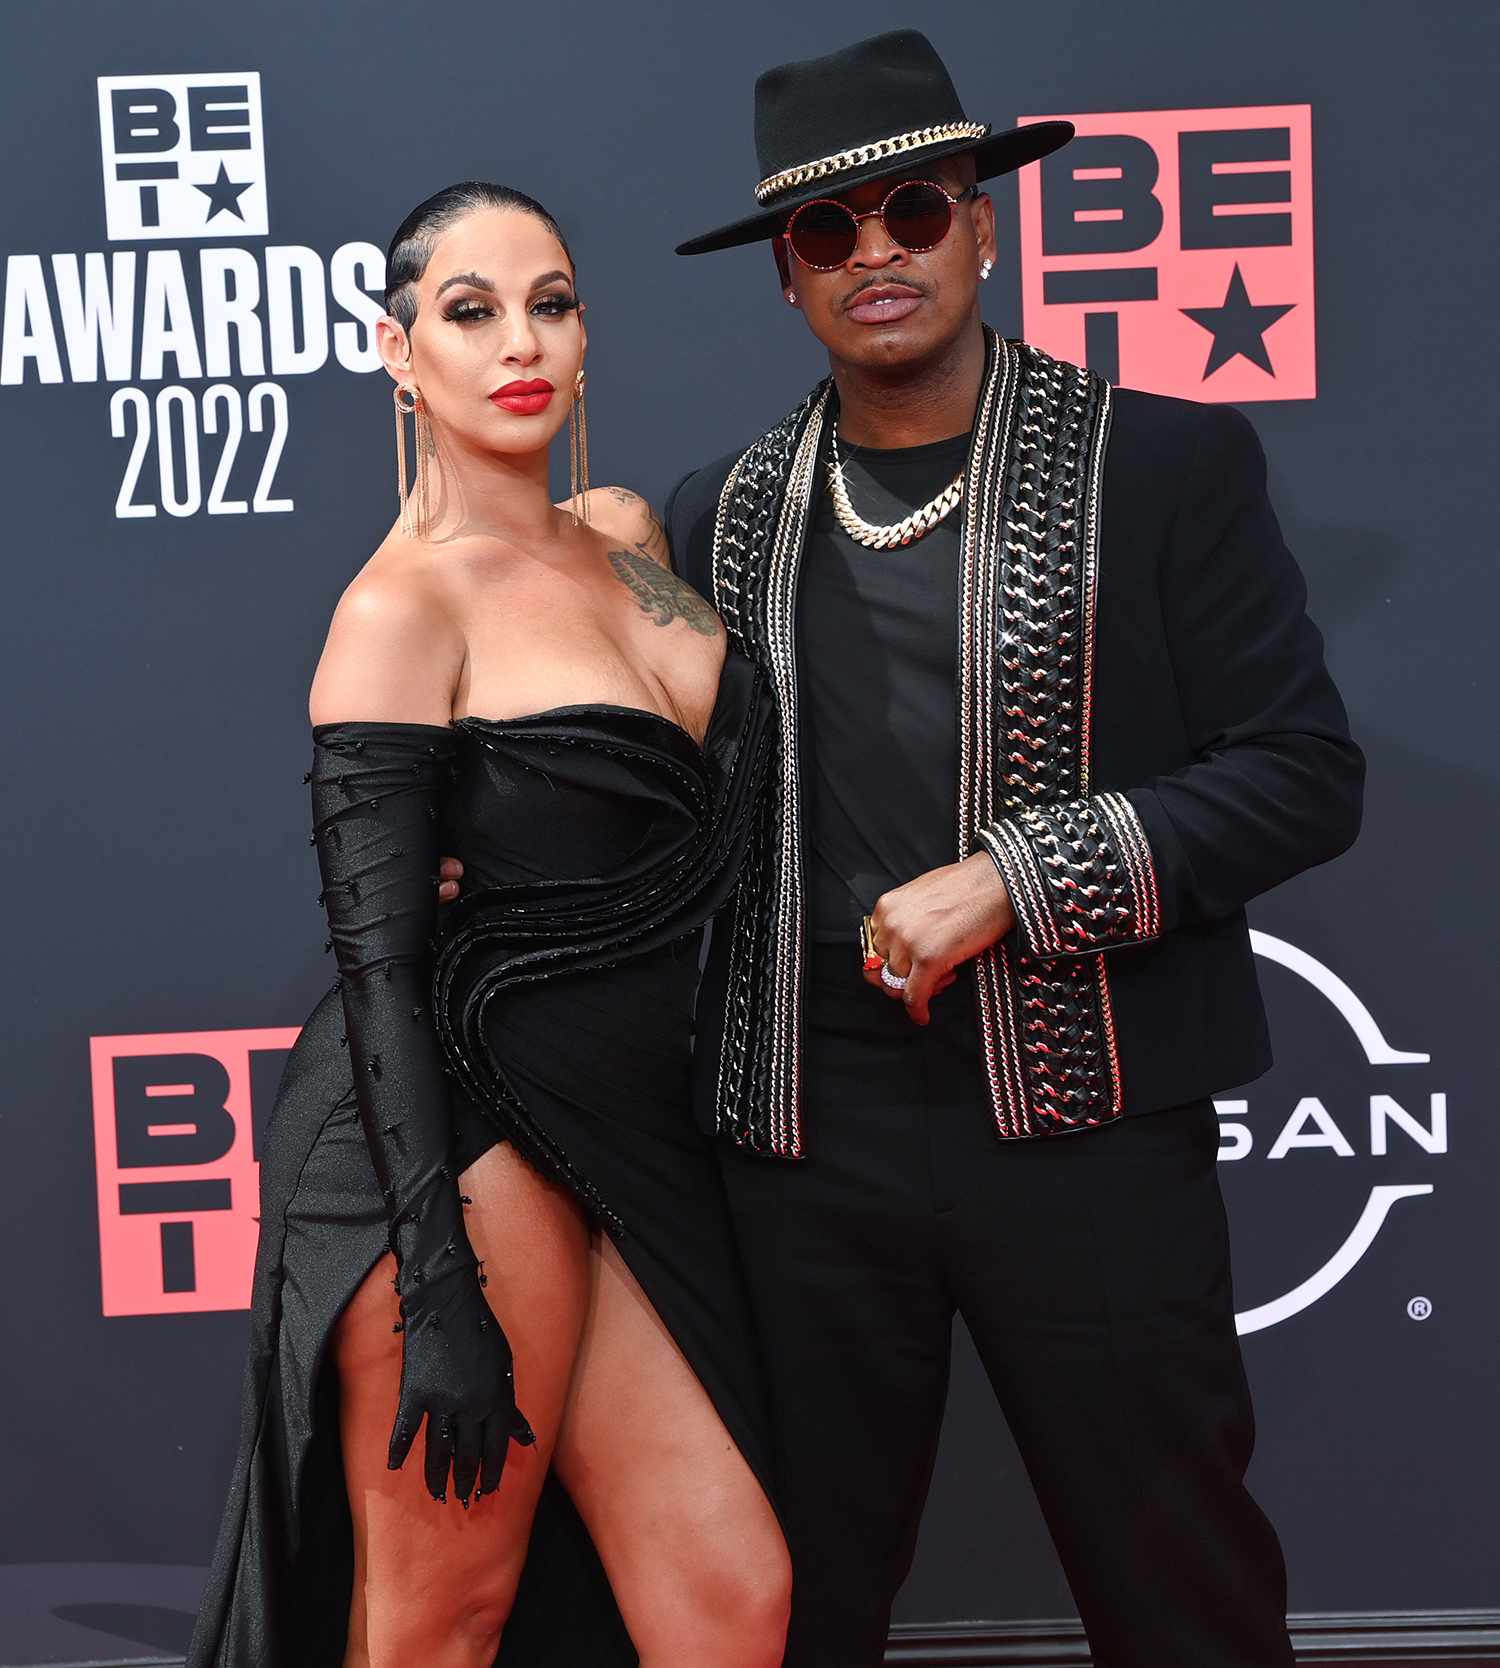 NE-YO's Wife Crystal Renay Accuses Him of Cheating: '8 Years of Lies and Deception'